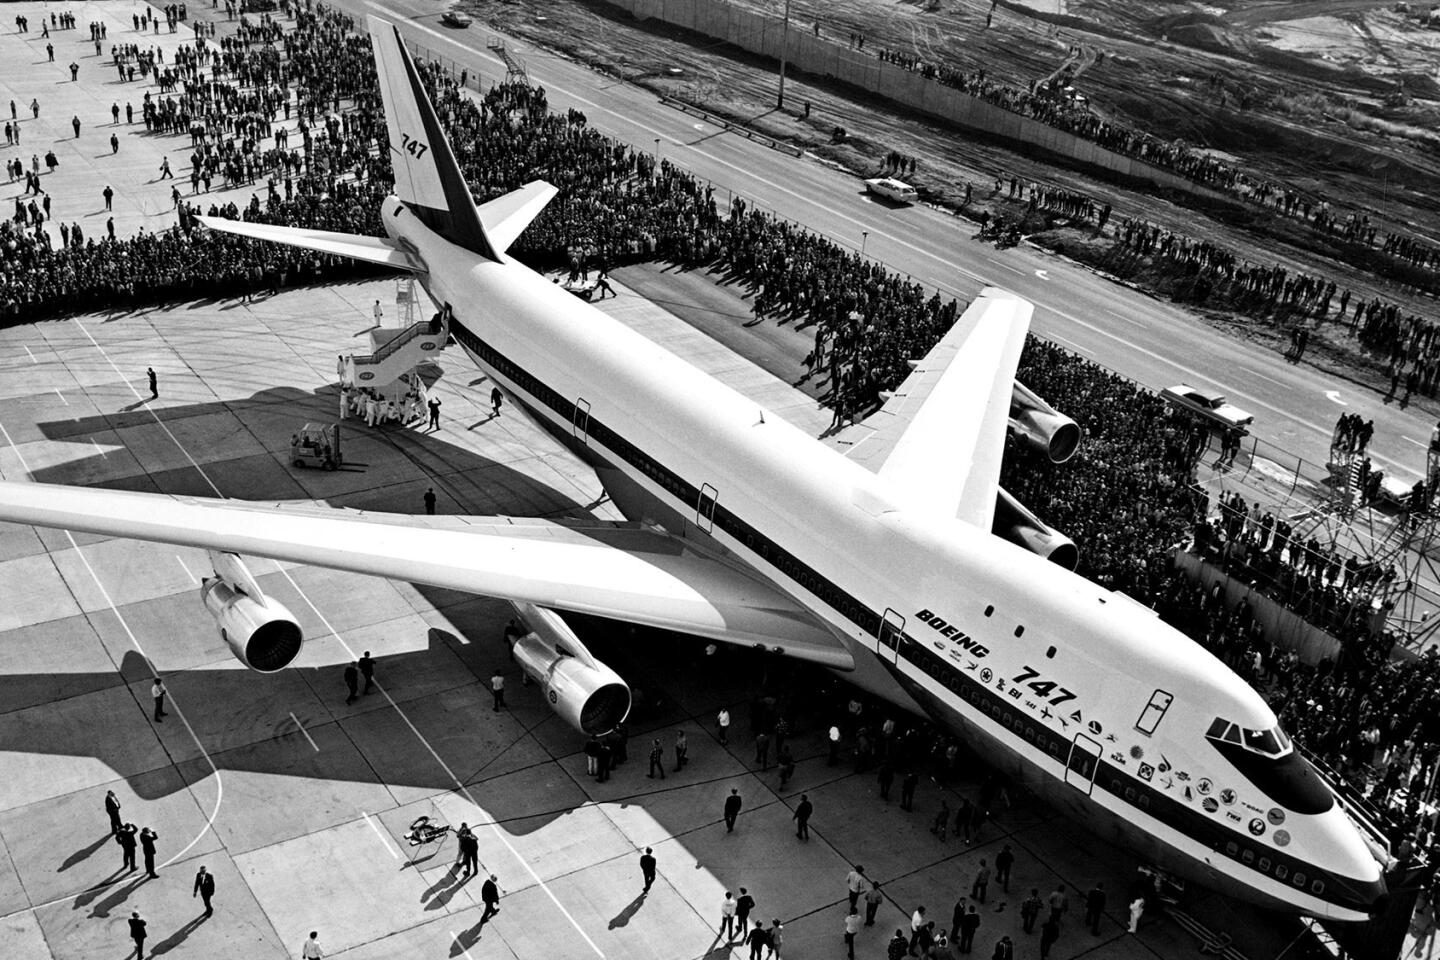 The Boeing 747 | Queen of the skies